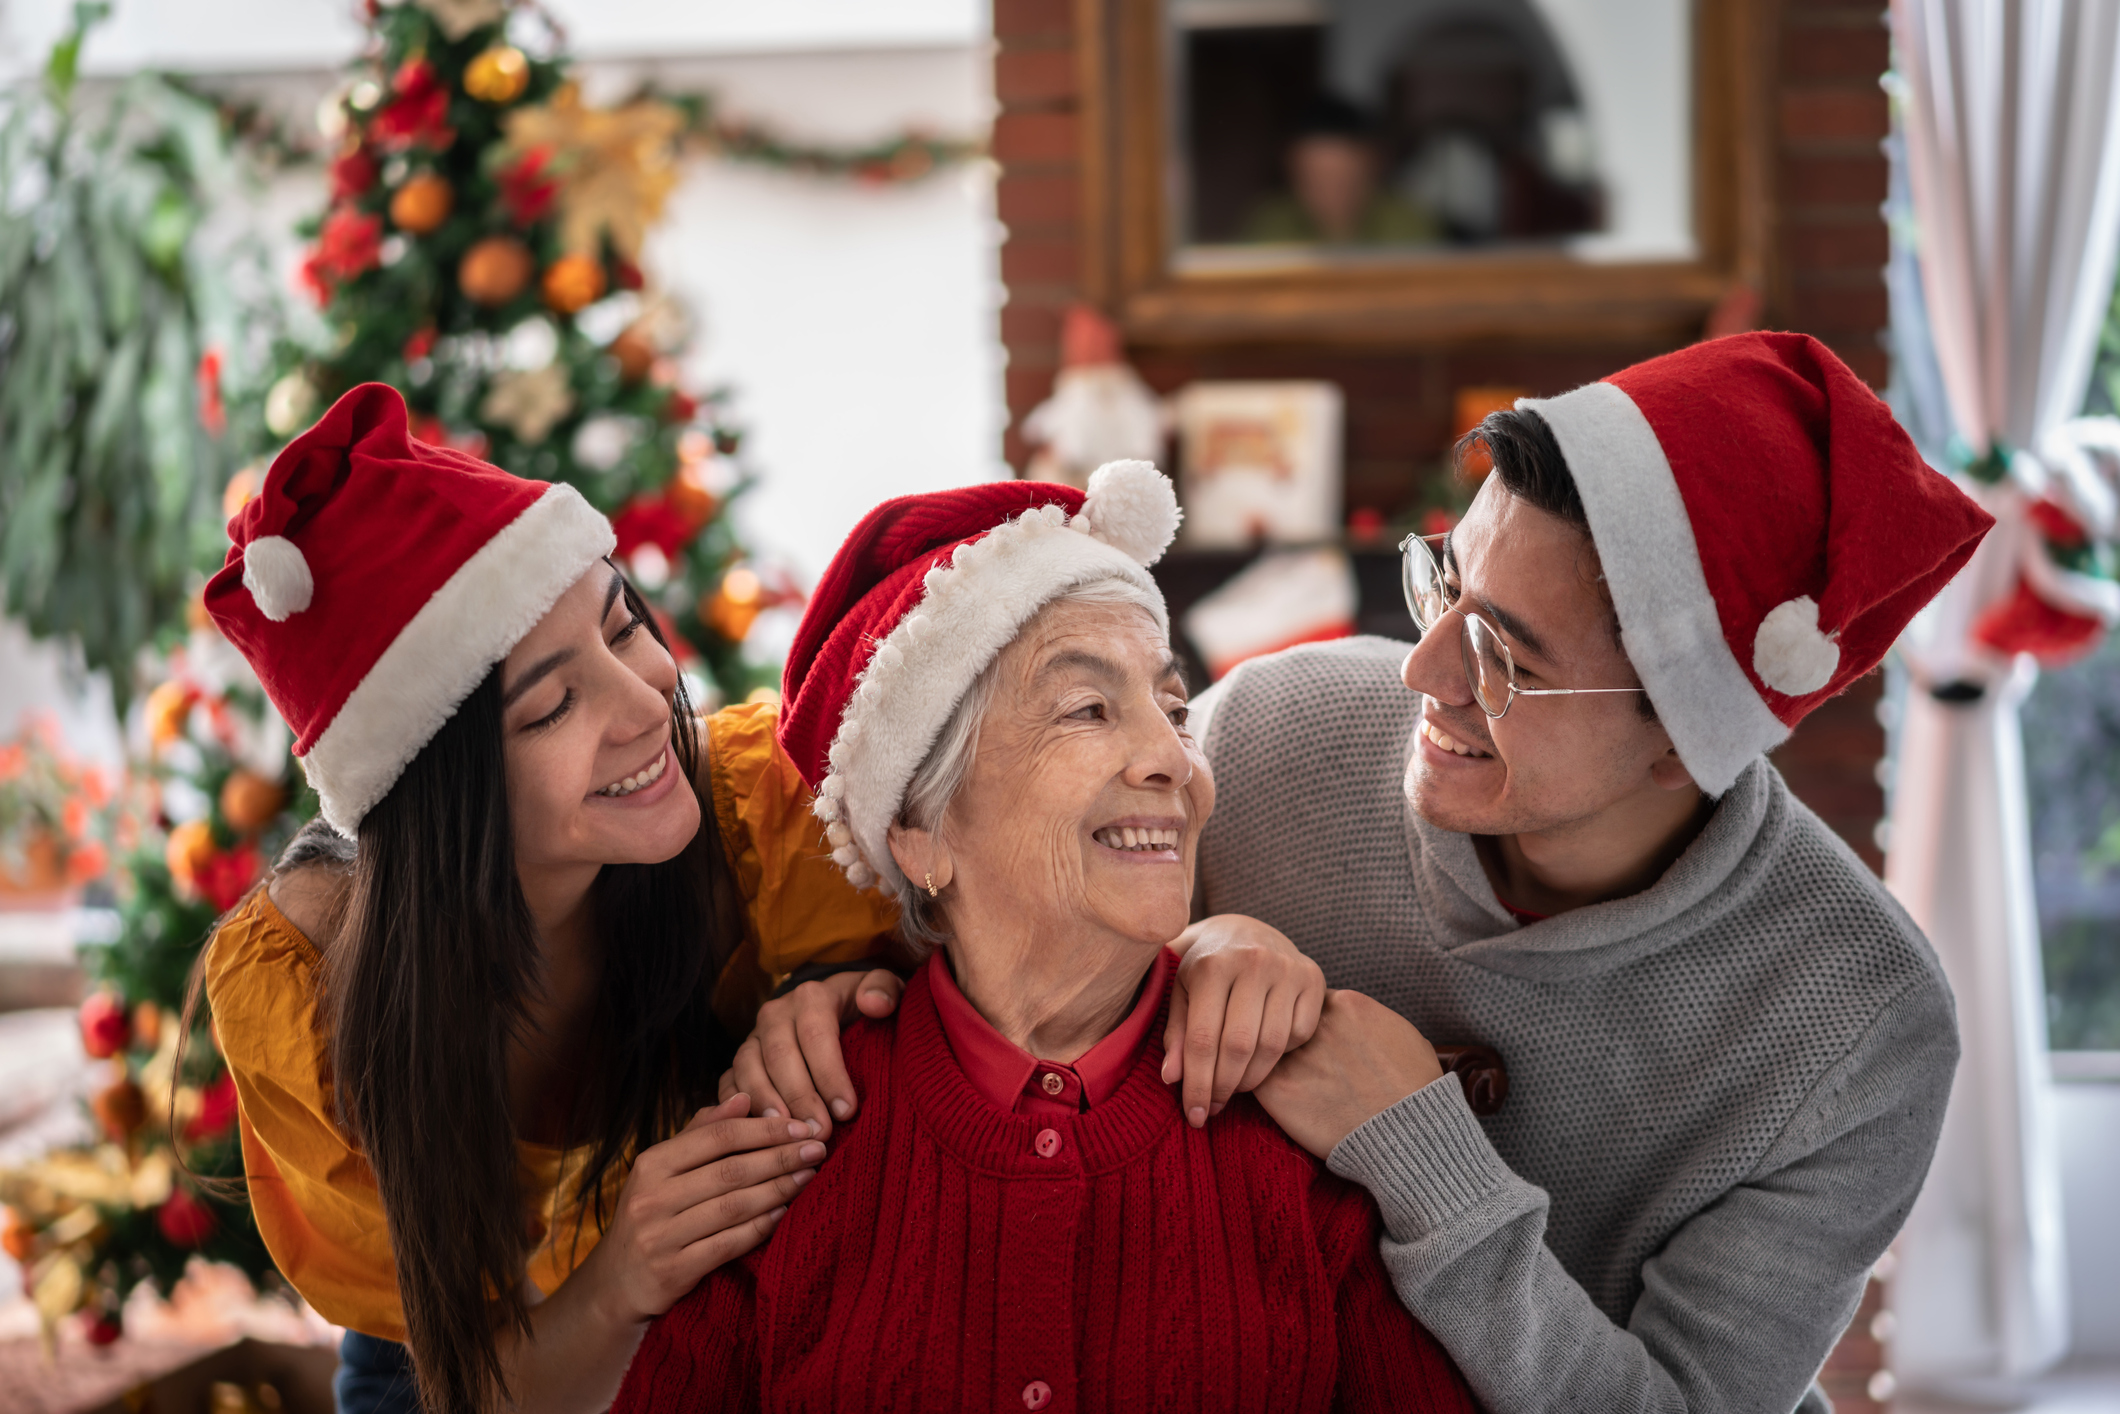 Portrait of brother and sister hugging their grandmother looking at each other smiling all wearing Santa's hats on Christmas Eve - Celebration concepts